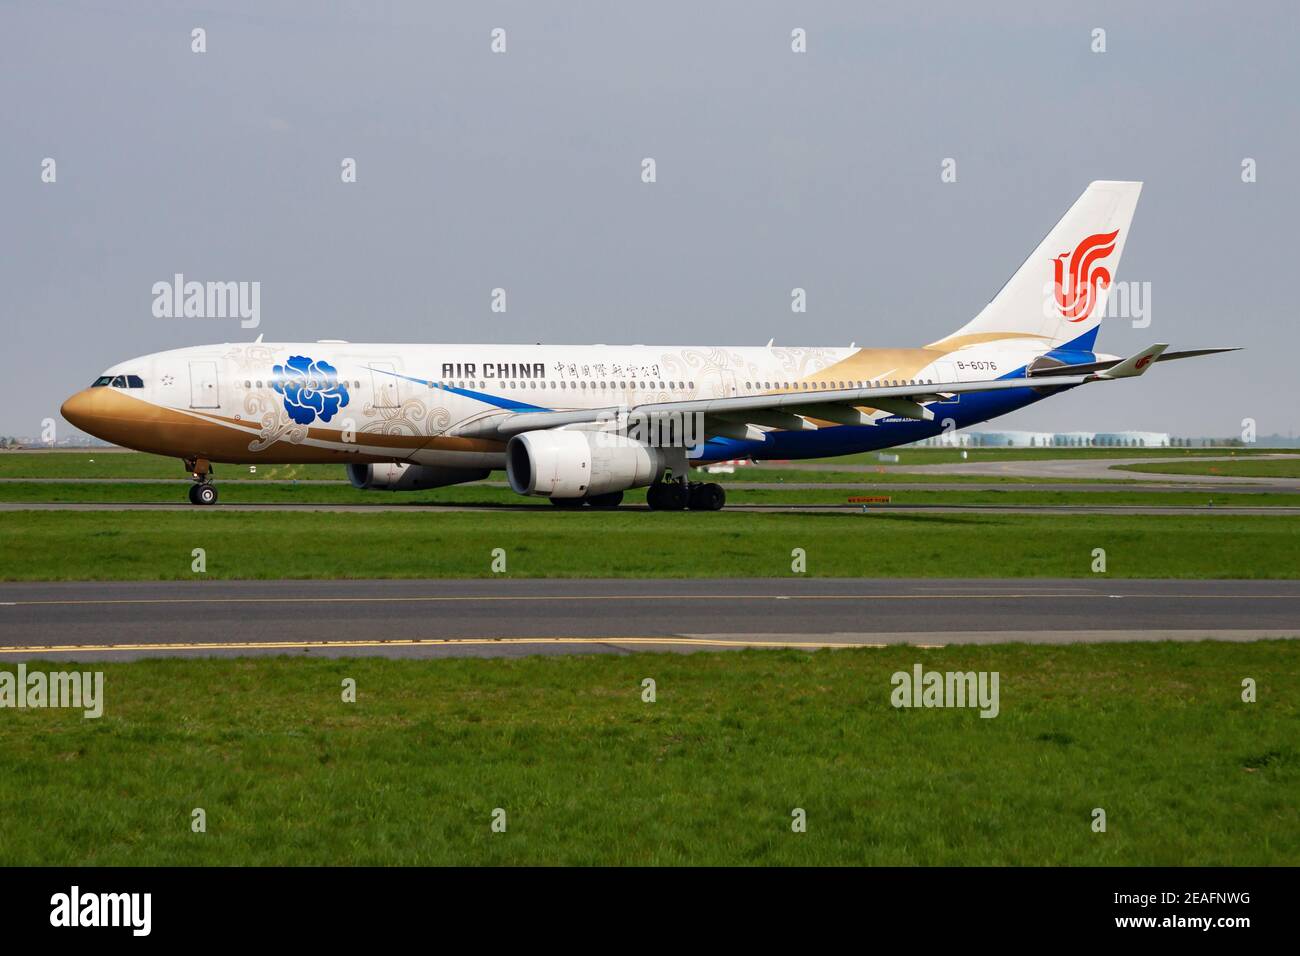 Air China special livery Airbus A330-200 B-6076 passenger plane departure and take off at Paris Charles de Gaulle Airport Stock Photo